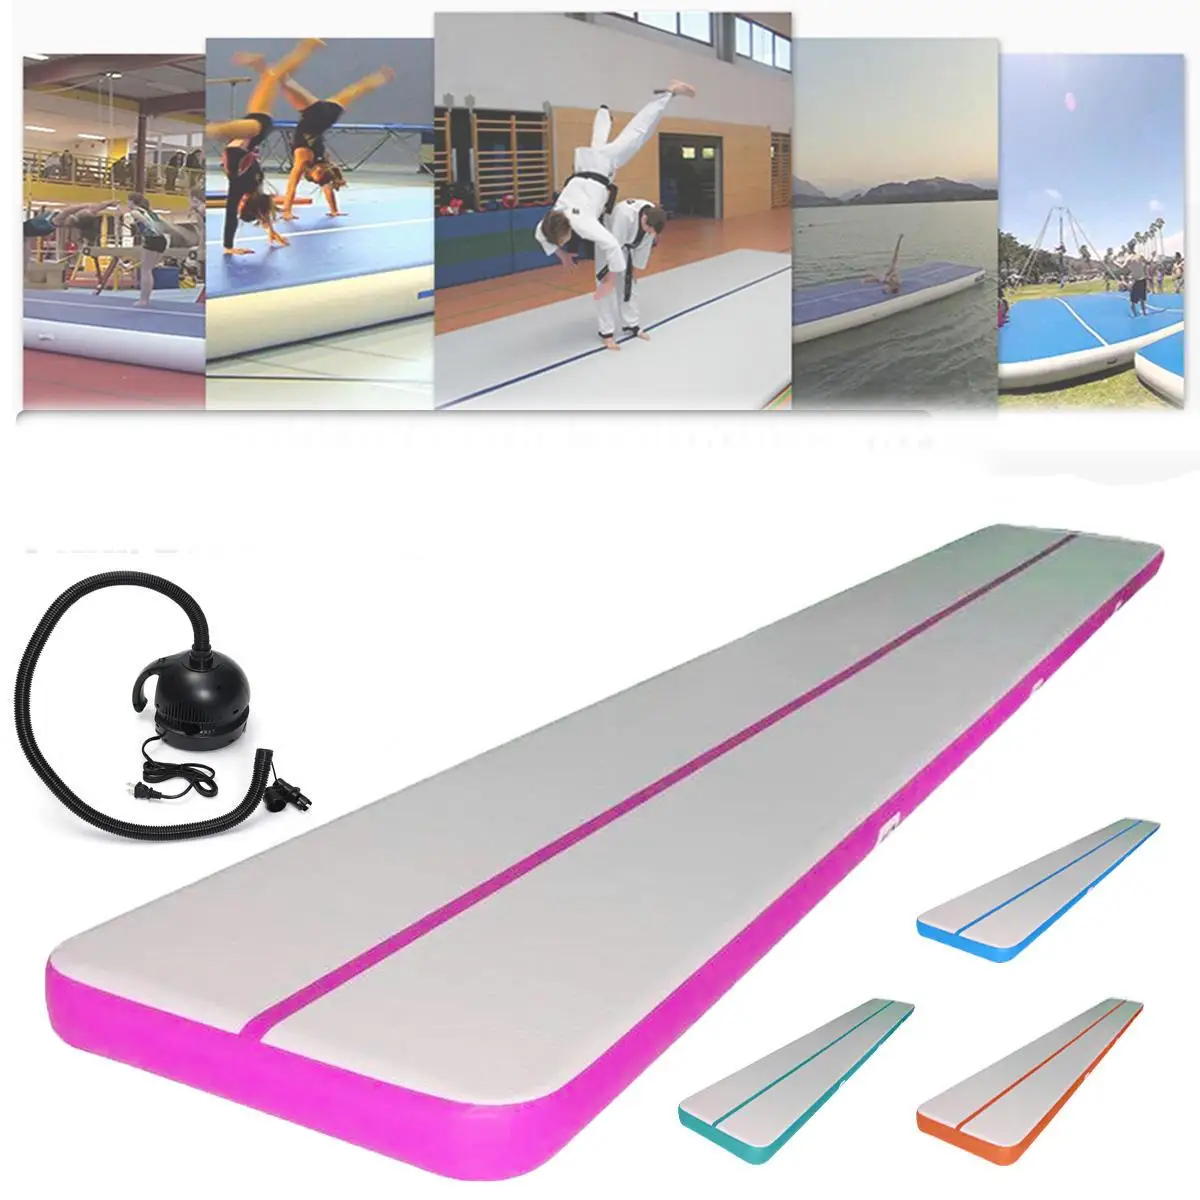 

5M*2M Airtrack Inflatable Air Track Floor Home Gymnastics Tumbling Mat GYM Yoga Mats For Home Use/Training/Cheerleading/Beach